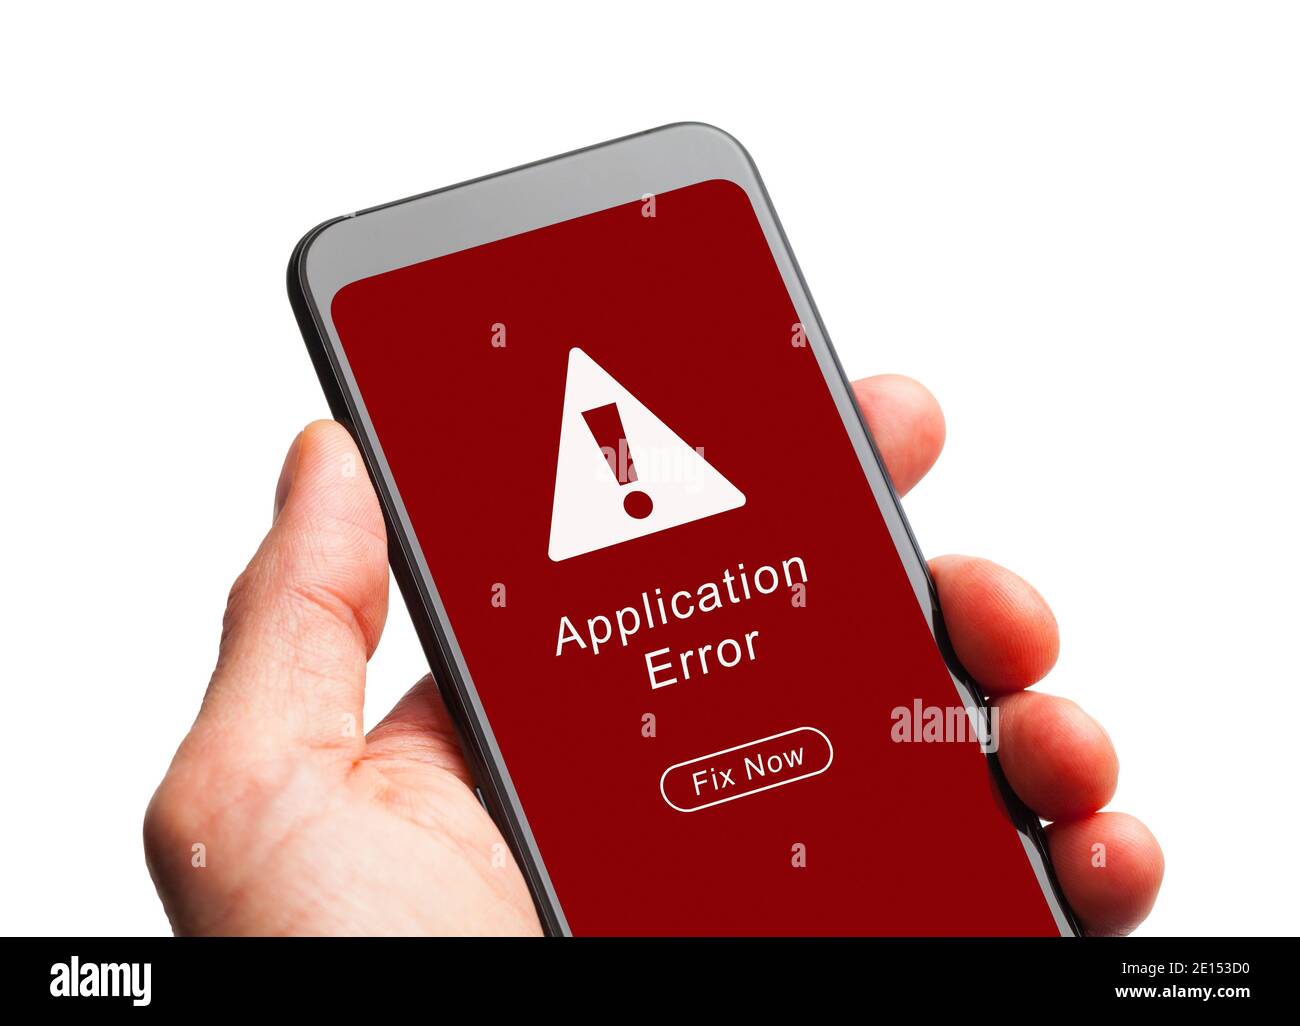 Hand Holding Smart Phone with Application Error Message. Stock Photo